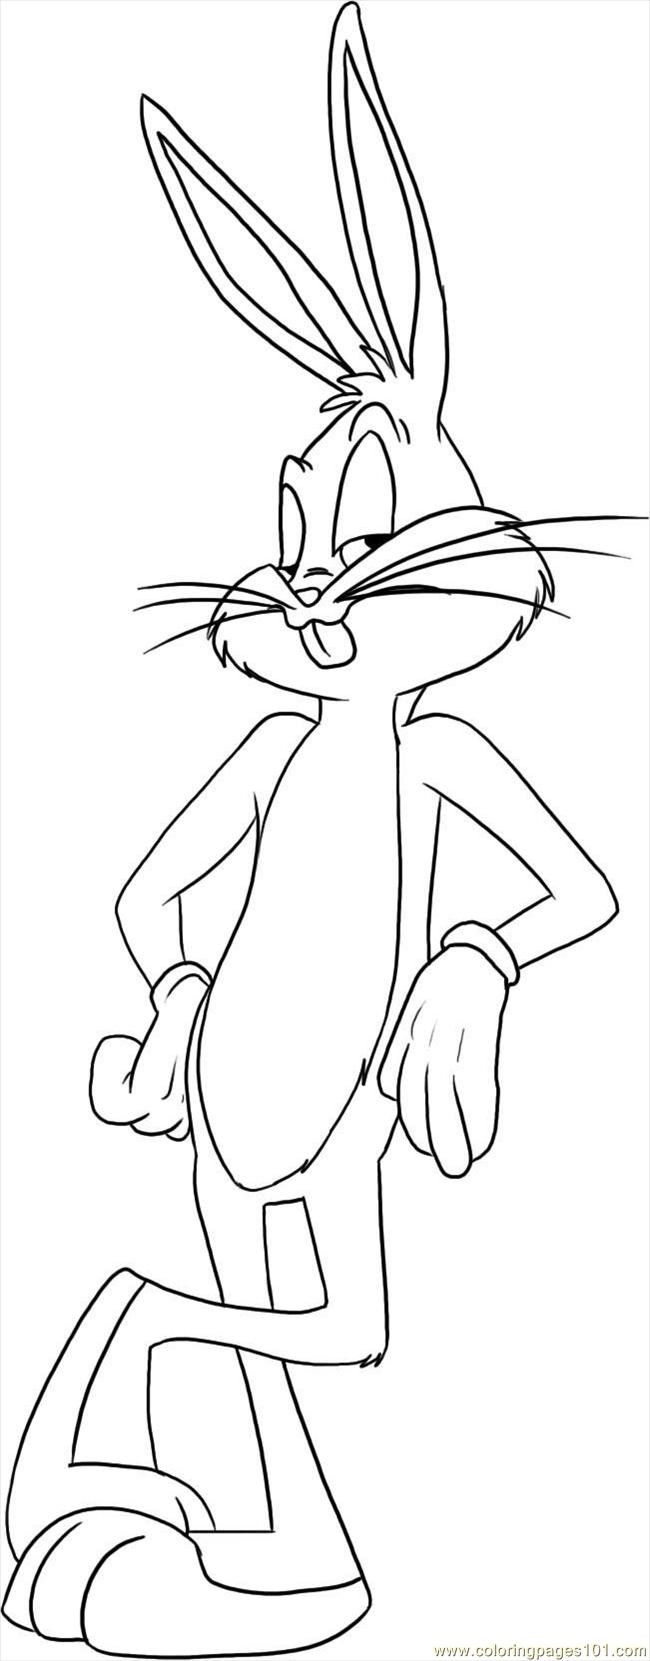 Bug Bunny Coloring Pages
 bugs bunny printable coloring pages